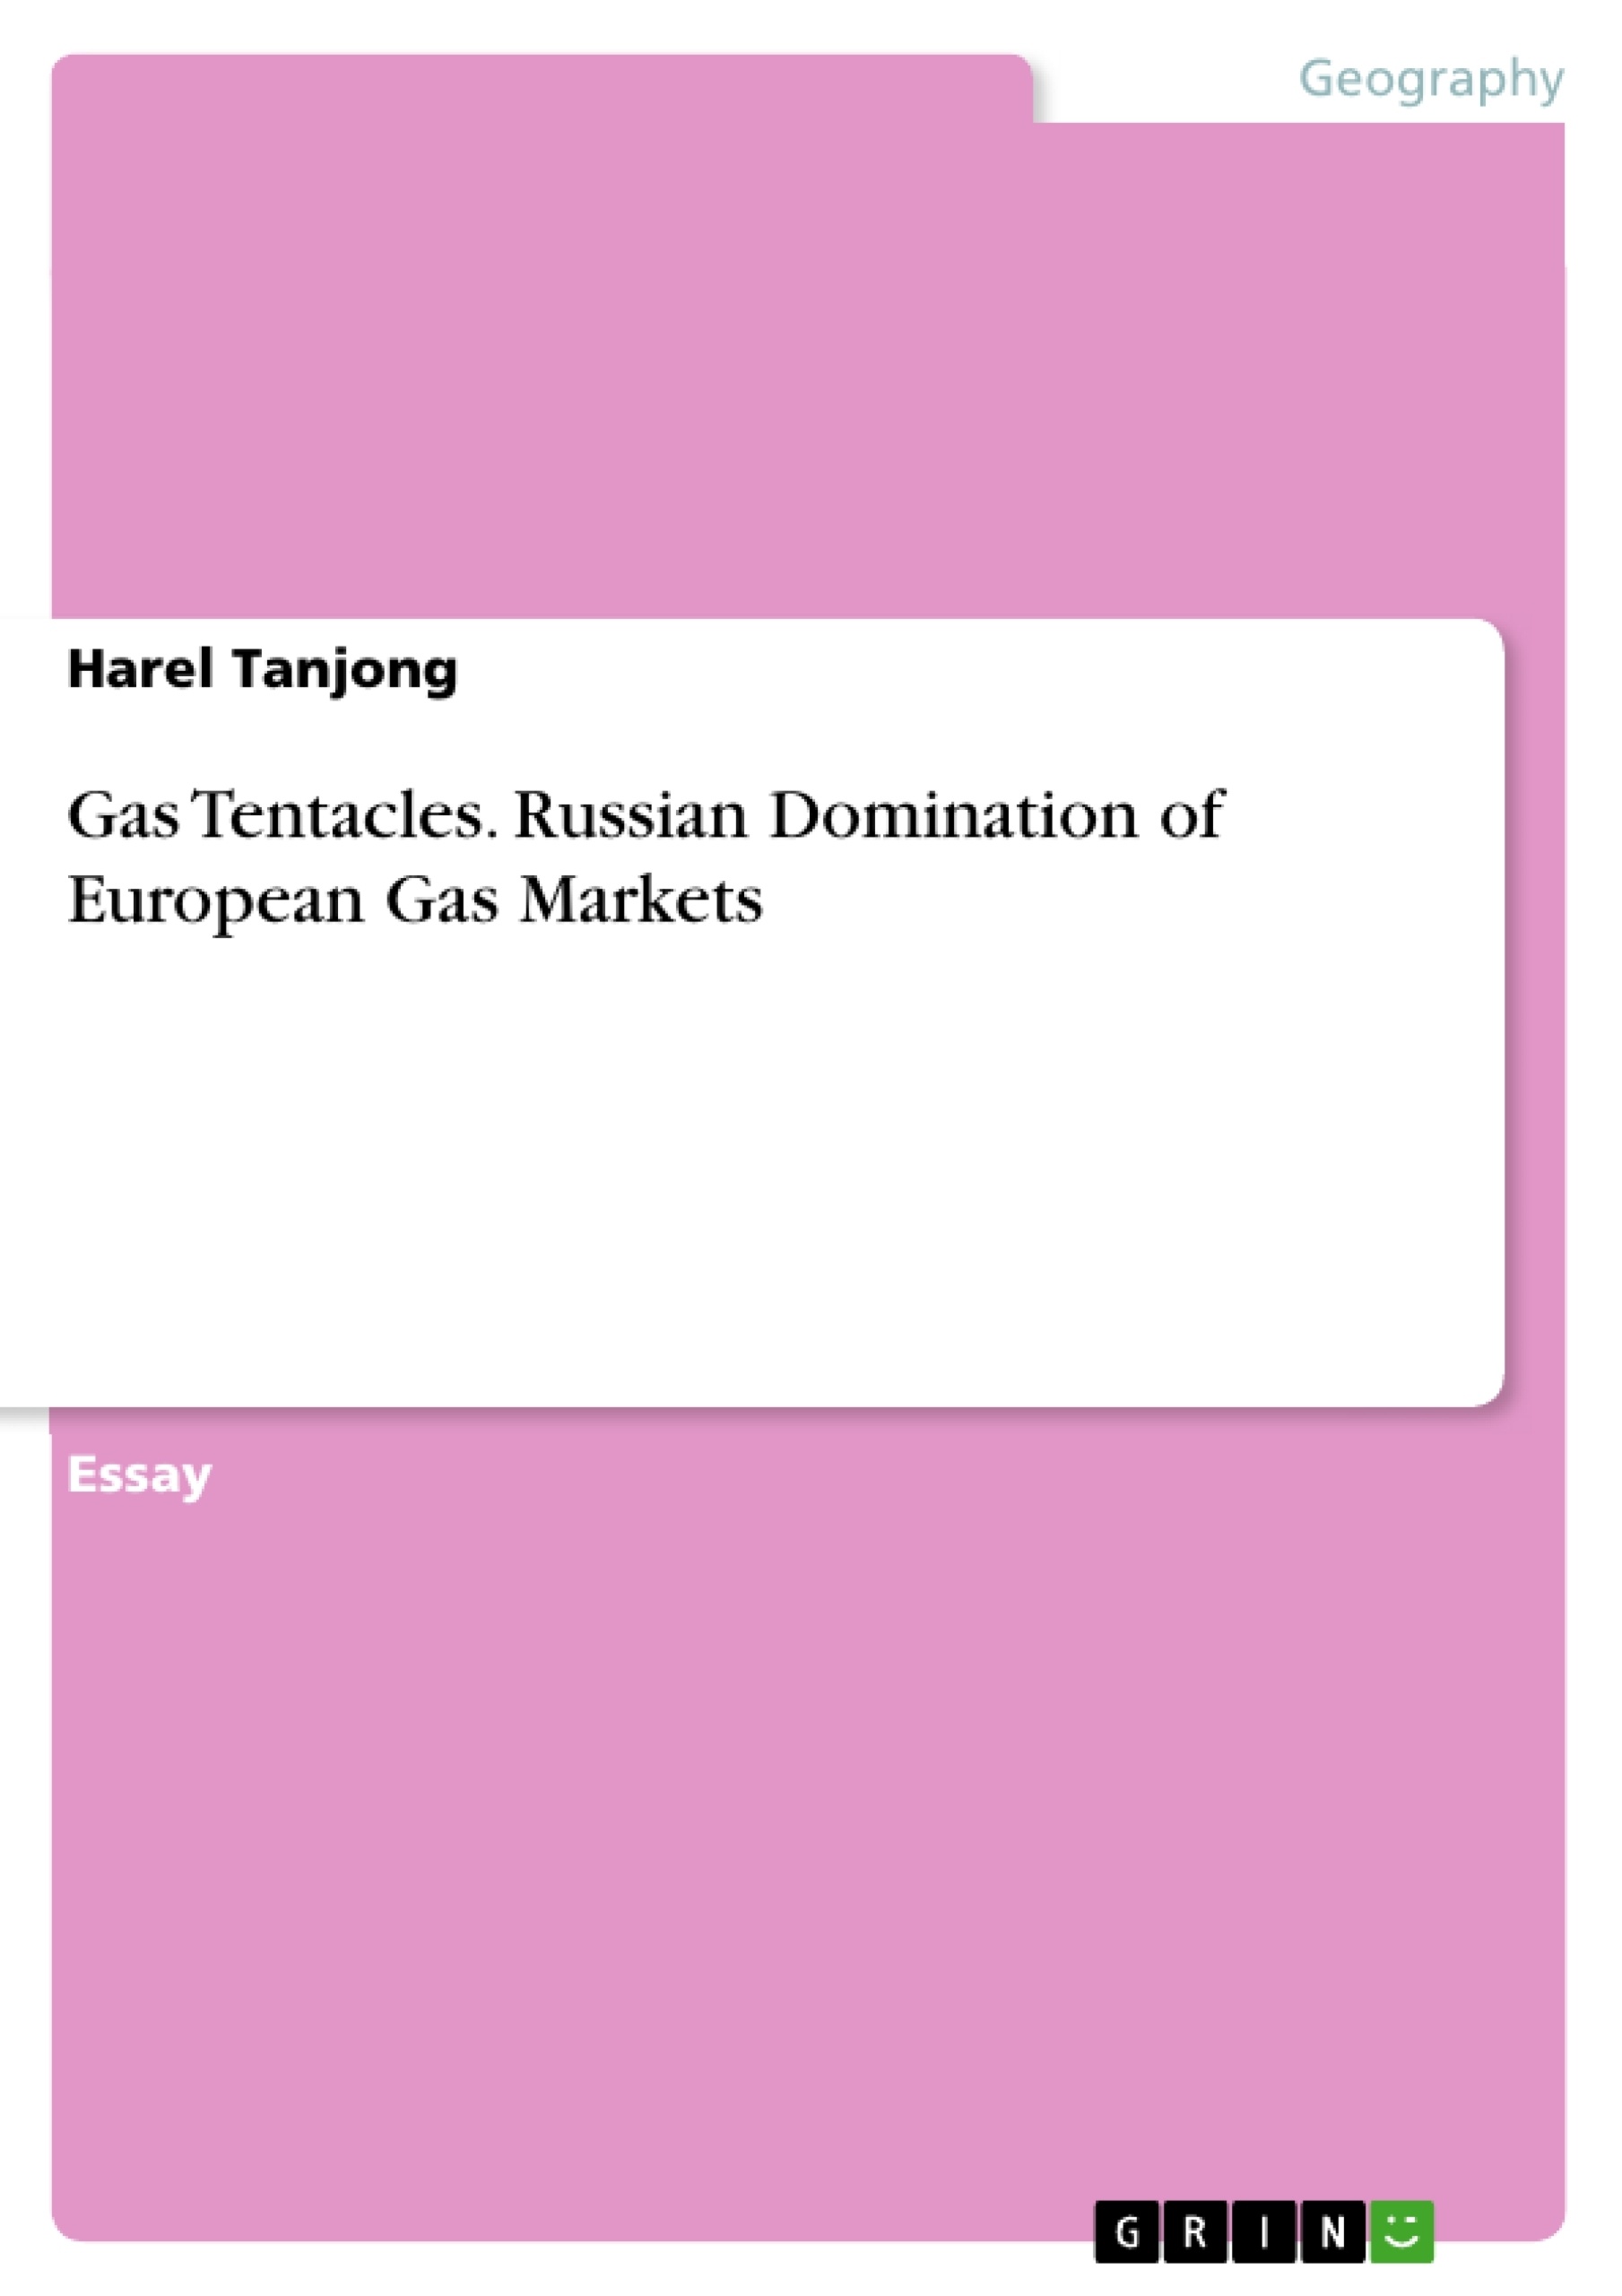 Title: Gas Tentacles. Russian Domination of European Gas Markets